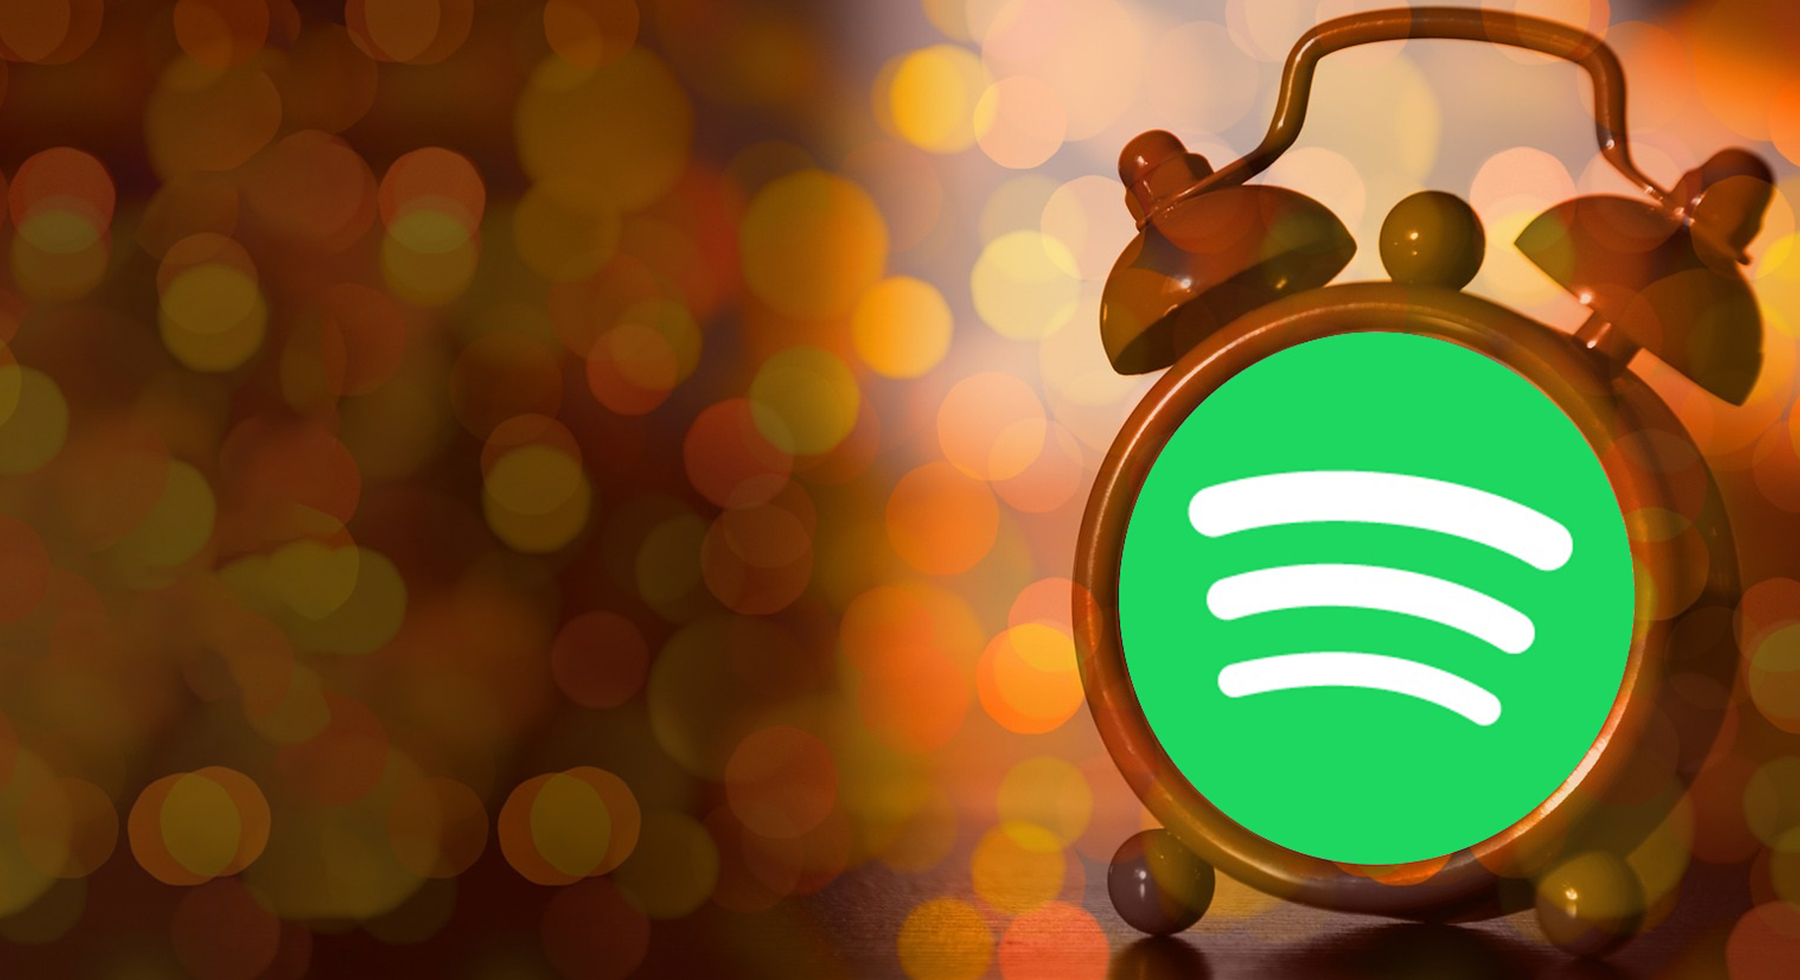 How to set a spotify song as an Alarm on Android